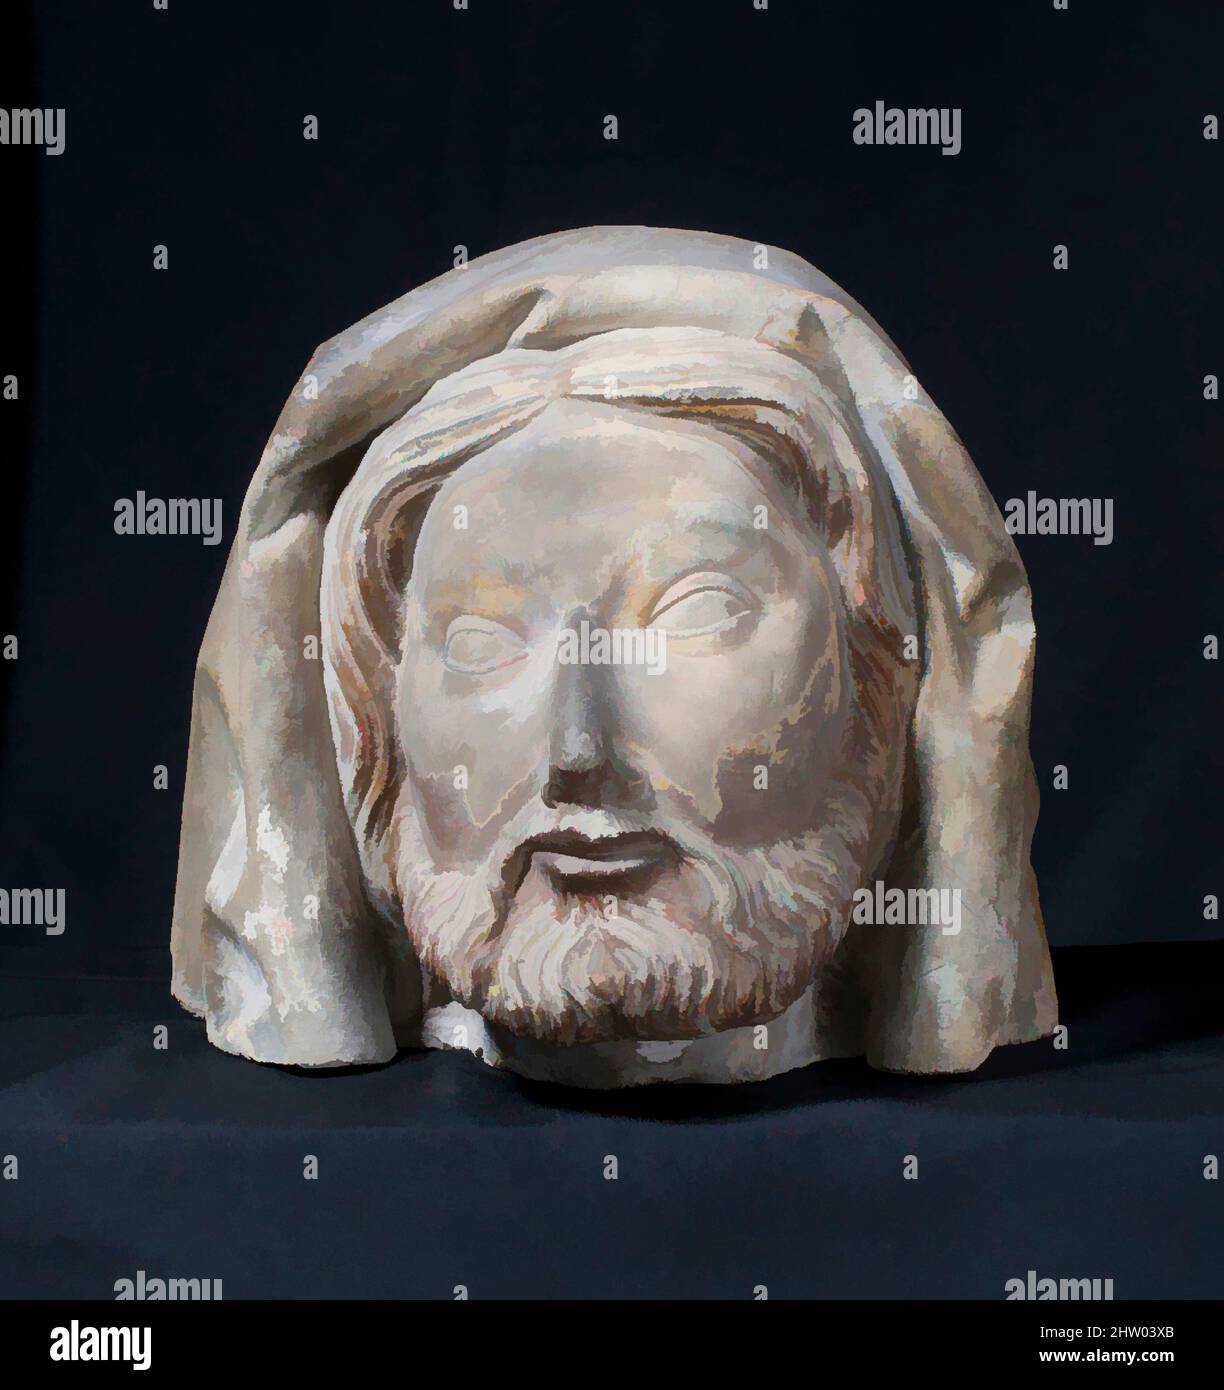 Art inspired by Head of a Bearded Man, 15th century, French, Stone, paint, Overall: 9 in. (22.9 cm), Sculpture, Classic works modernized by Artotop with a splash of modernity. Shapes, color and value, eye-catching visual impact on art. Emotions through freedom of artworks in a contemporary way. A timeless message pursuing a wildly creative new direction. Artists turning to the digital medium and creating the Artotop NFT Stock Photo